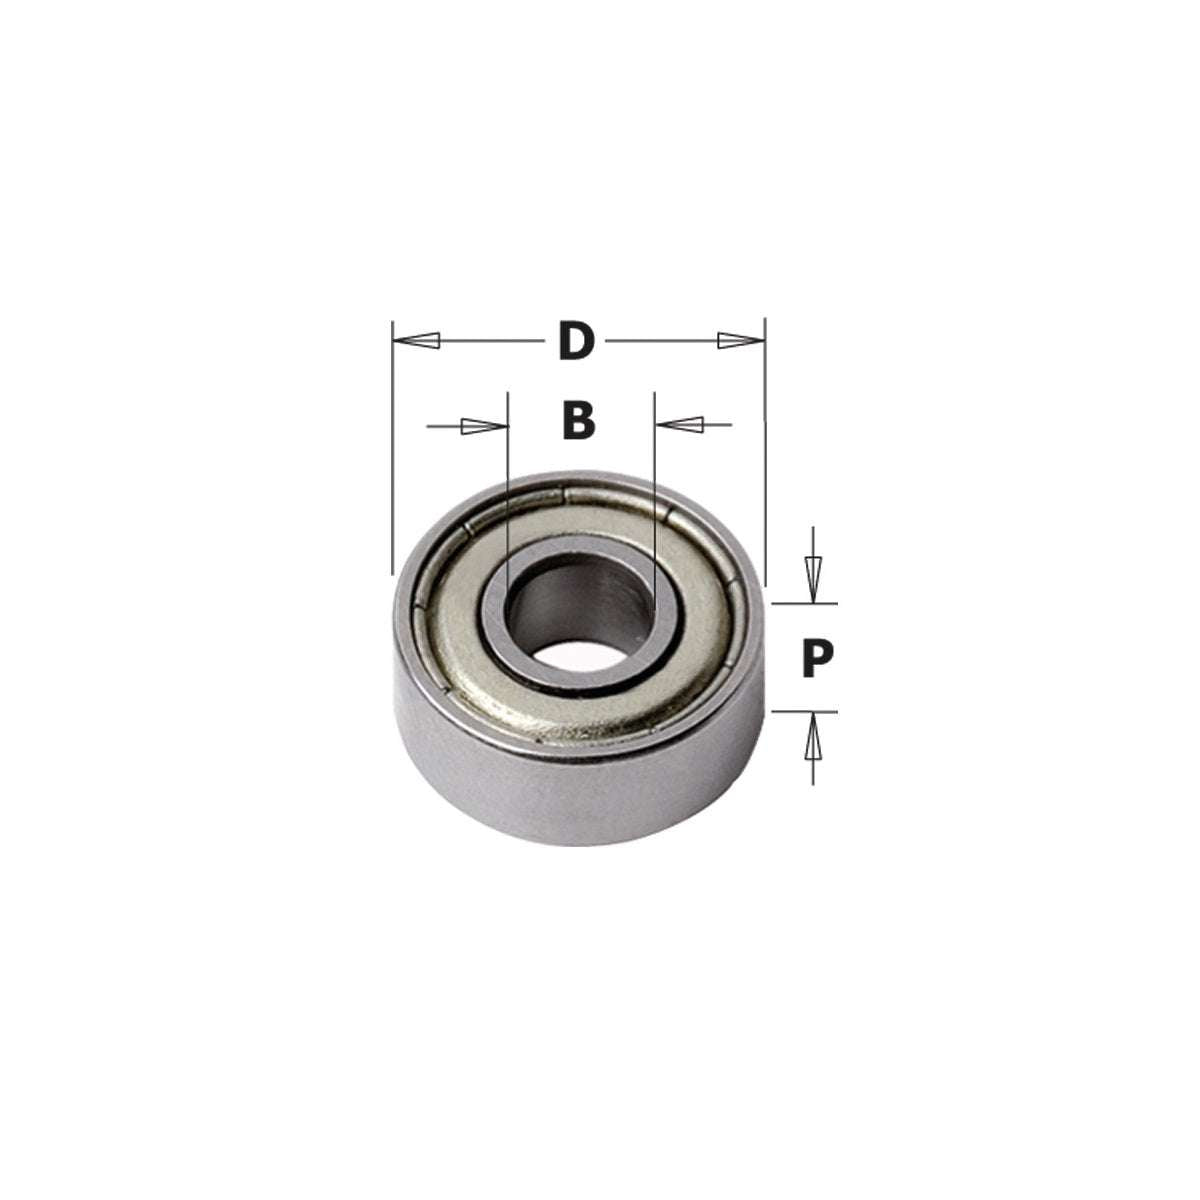 Replacement steel bearing for milling cutter, diameter 16 mm - CMT 791.006.00